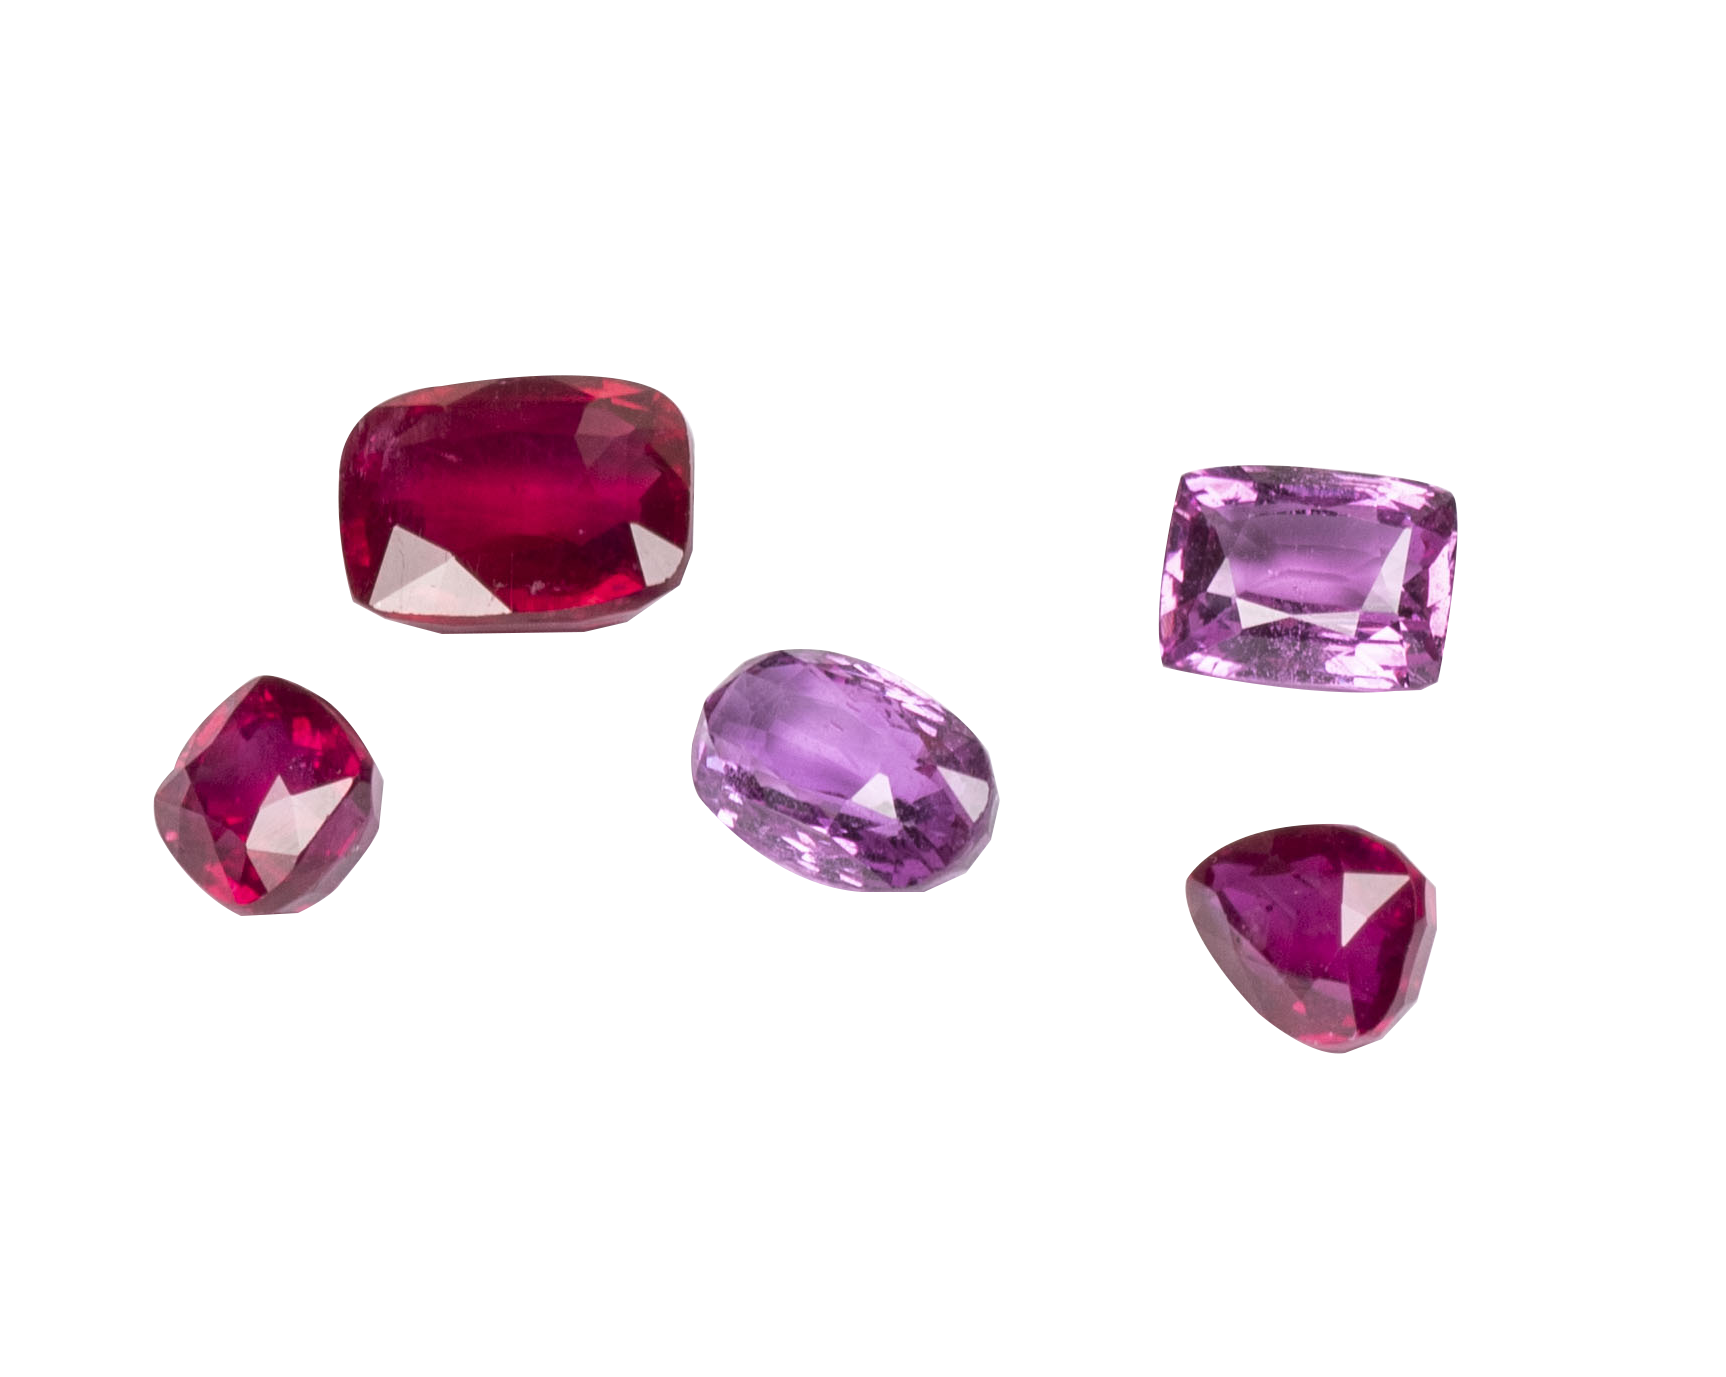 Rubies (manik) on a white background